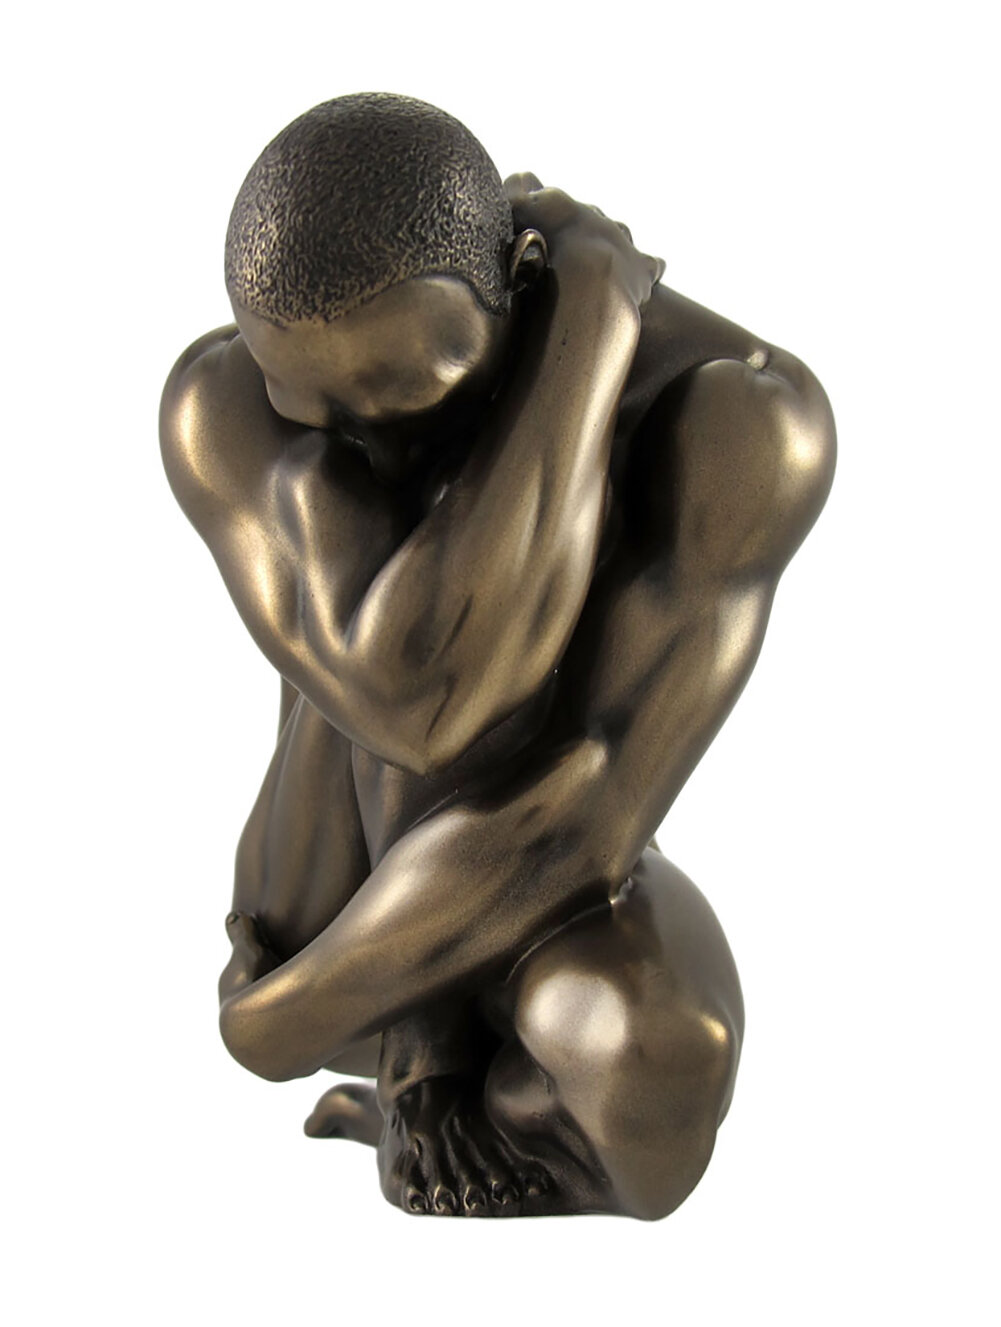 Bronzed Nude Male Posed Crouching Statue 